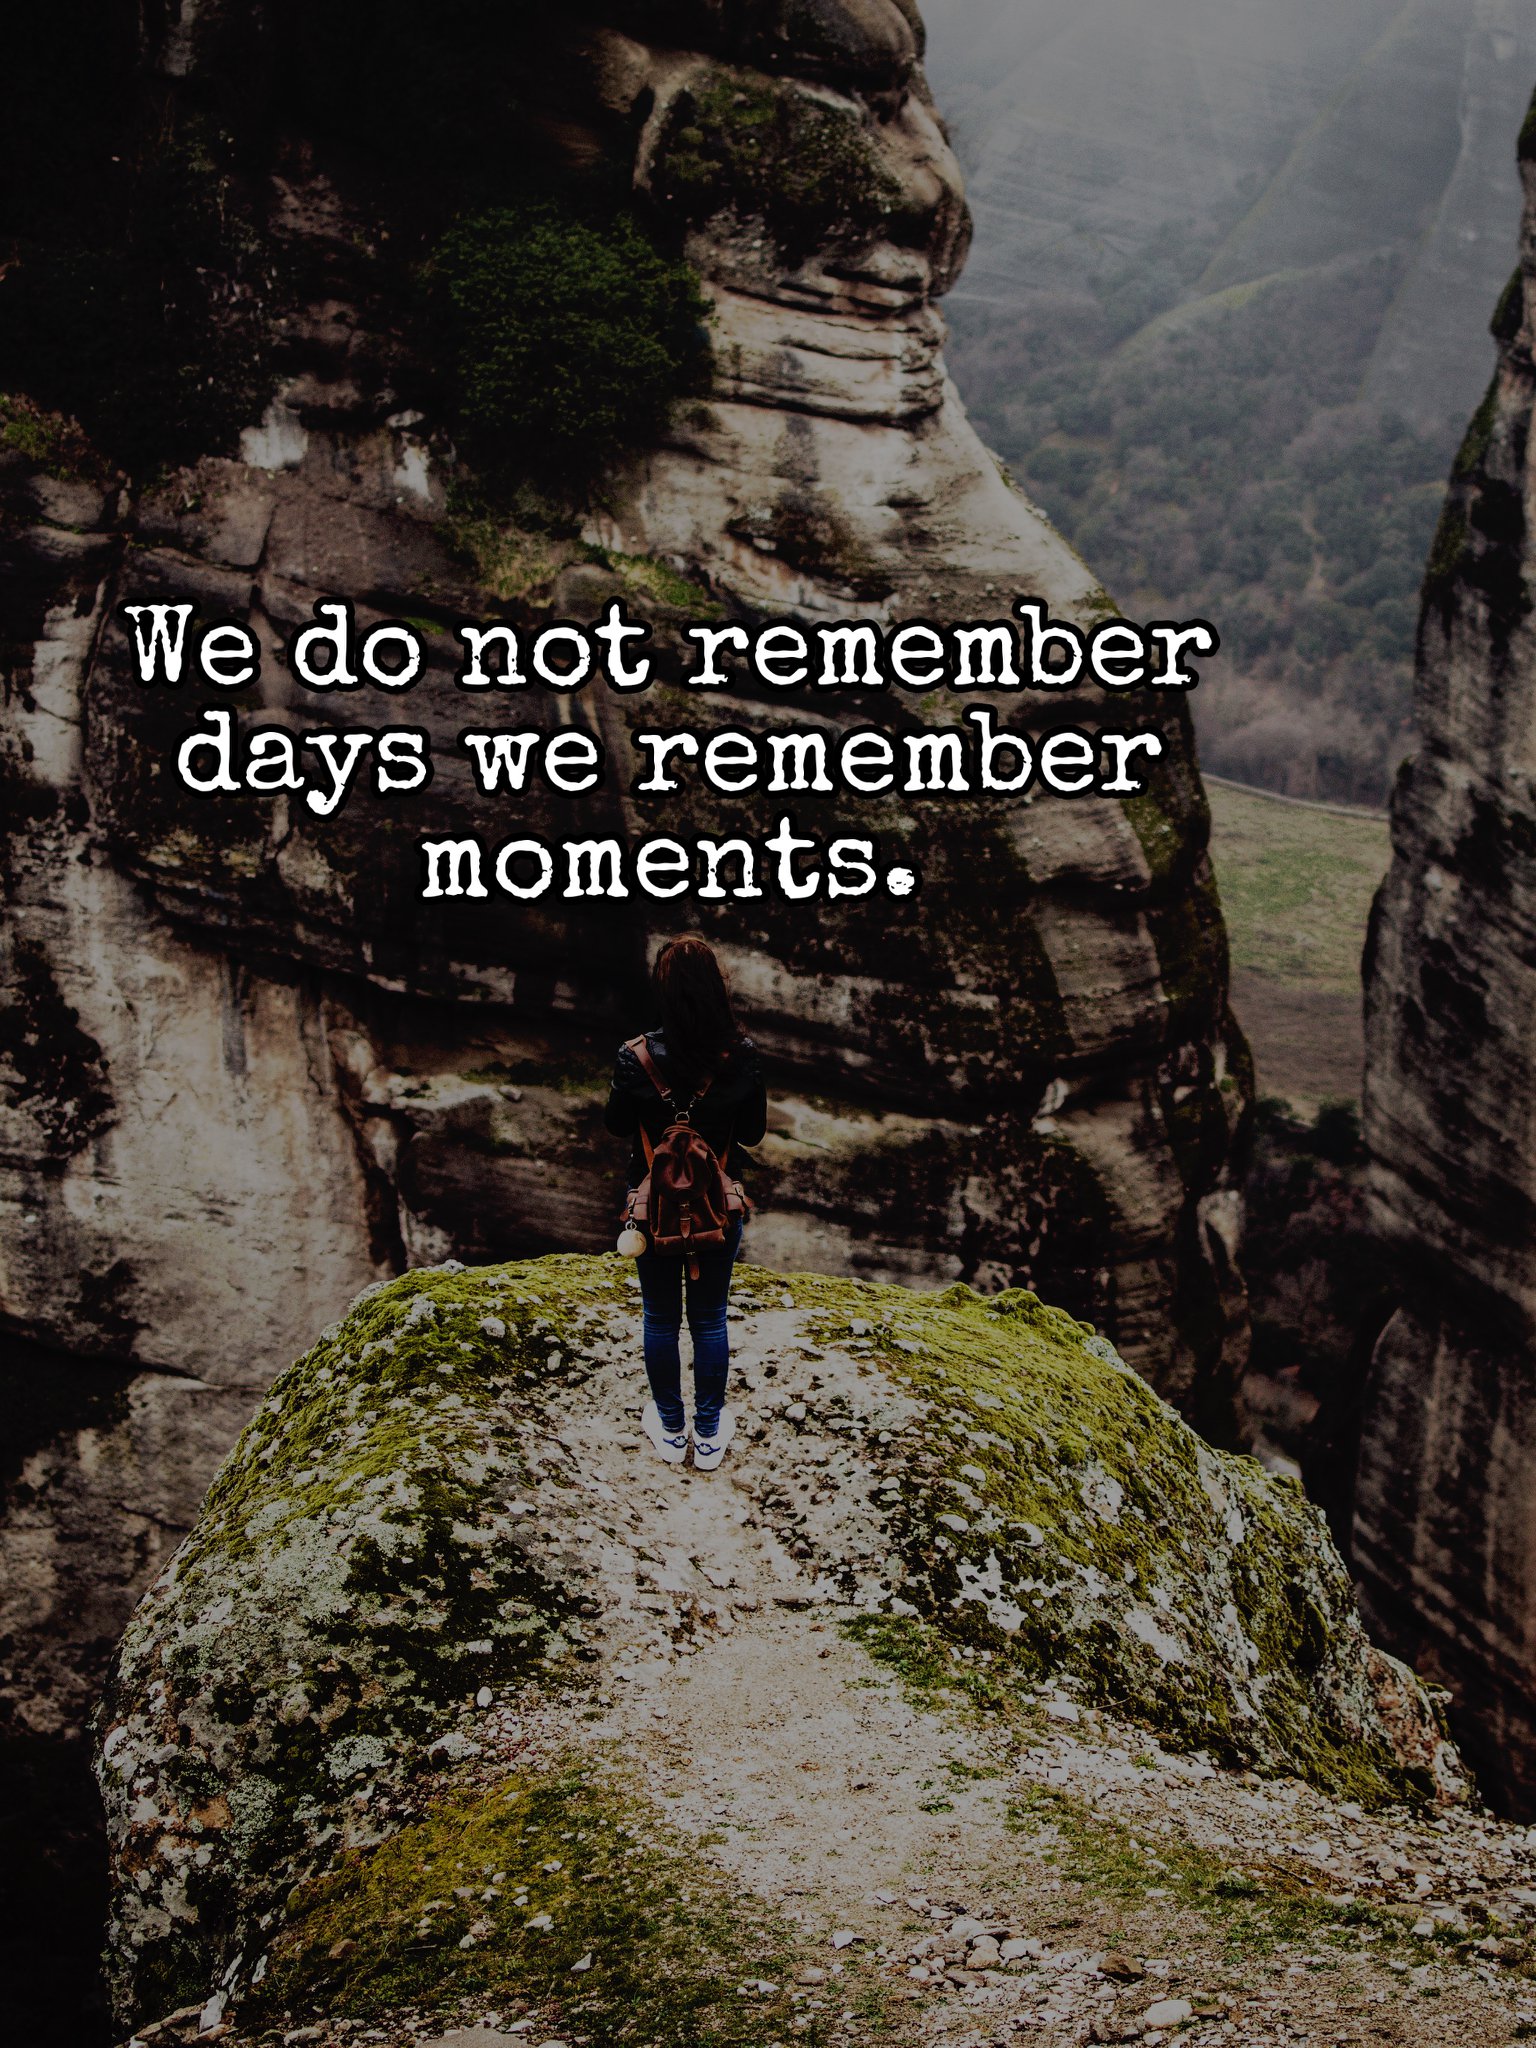 We do not remember days we remember moments.